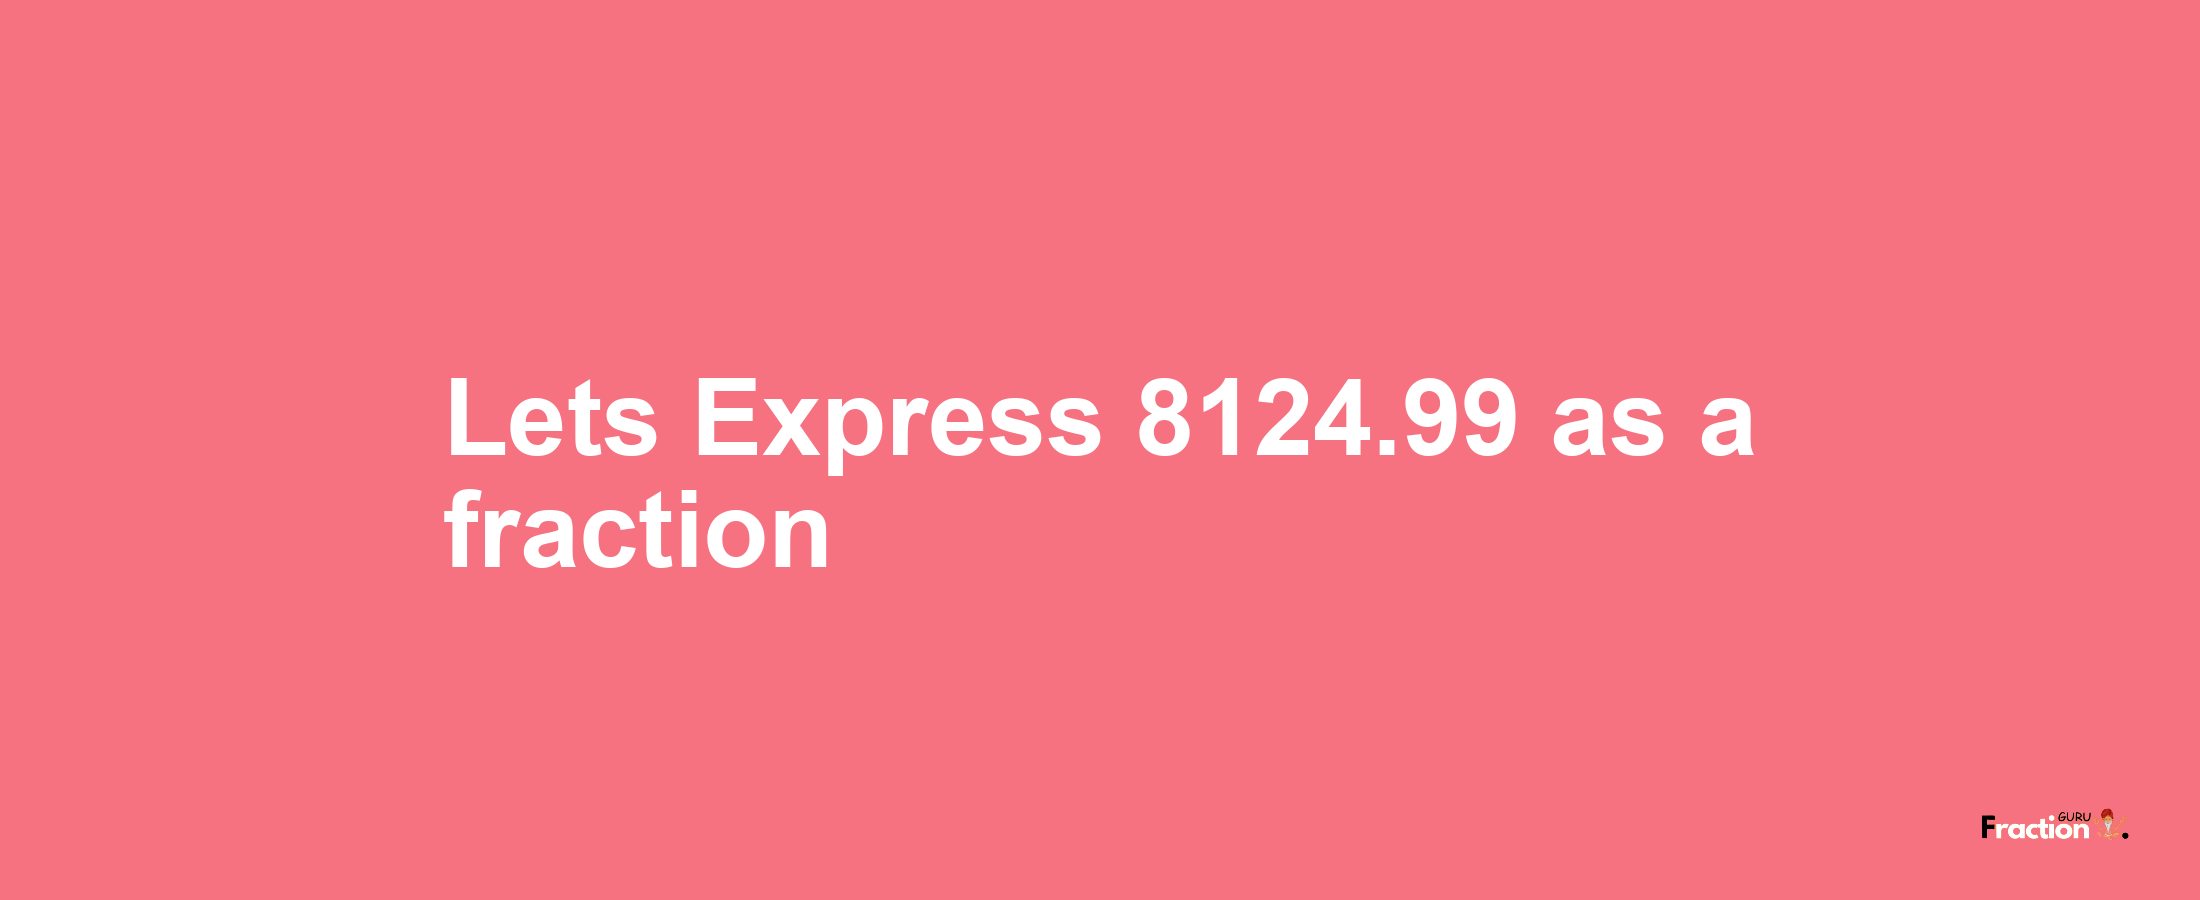 Lets Express 8124.99 as afraction